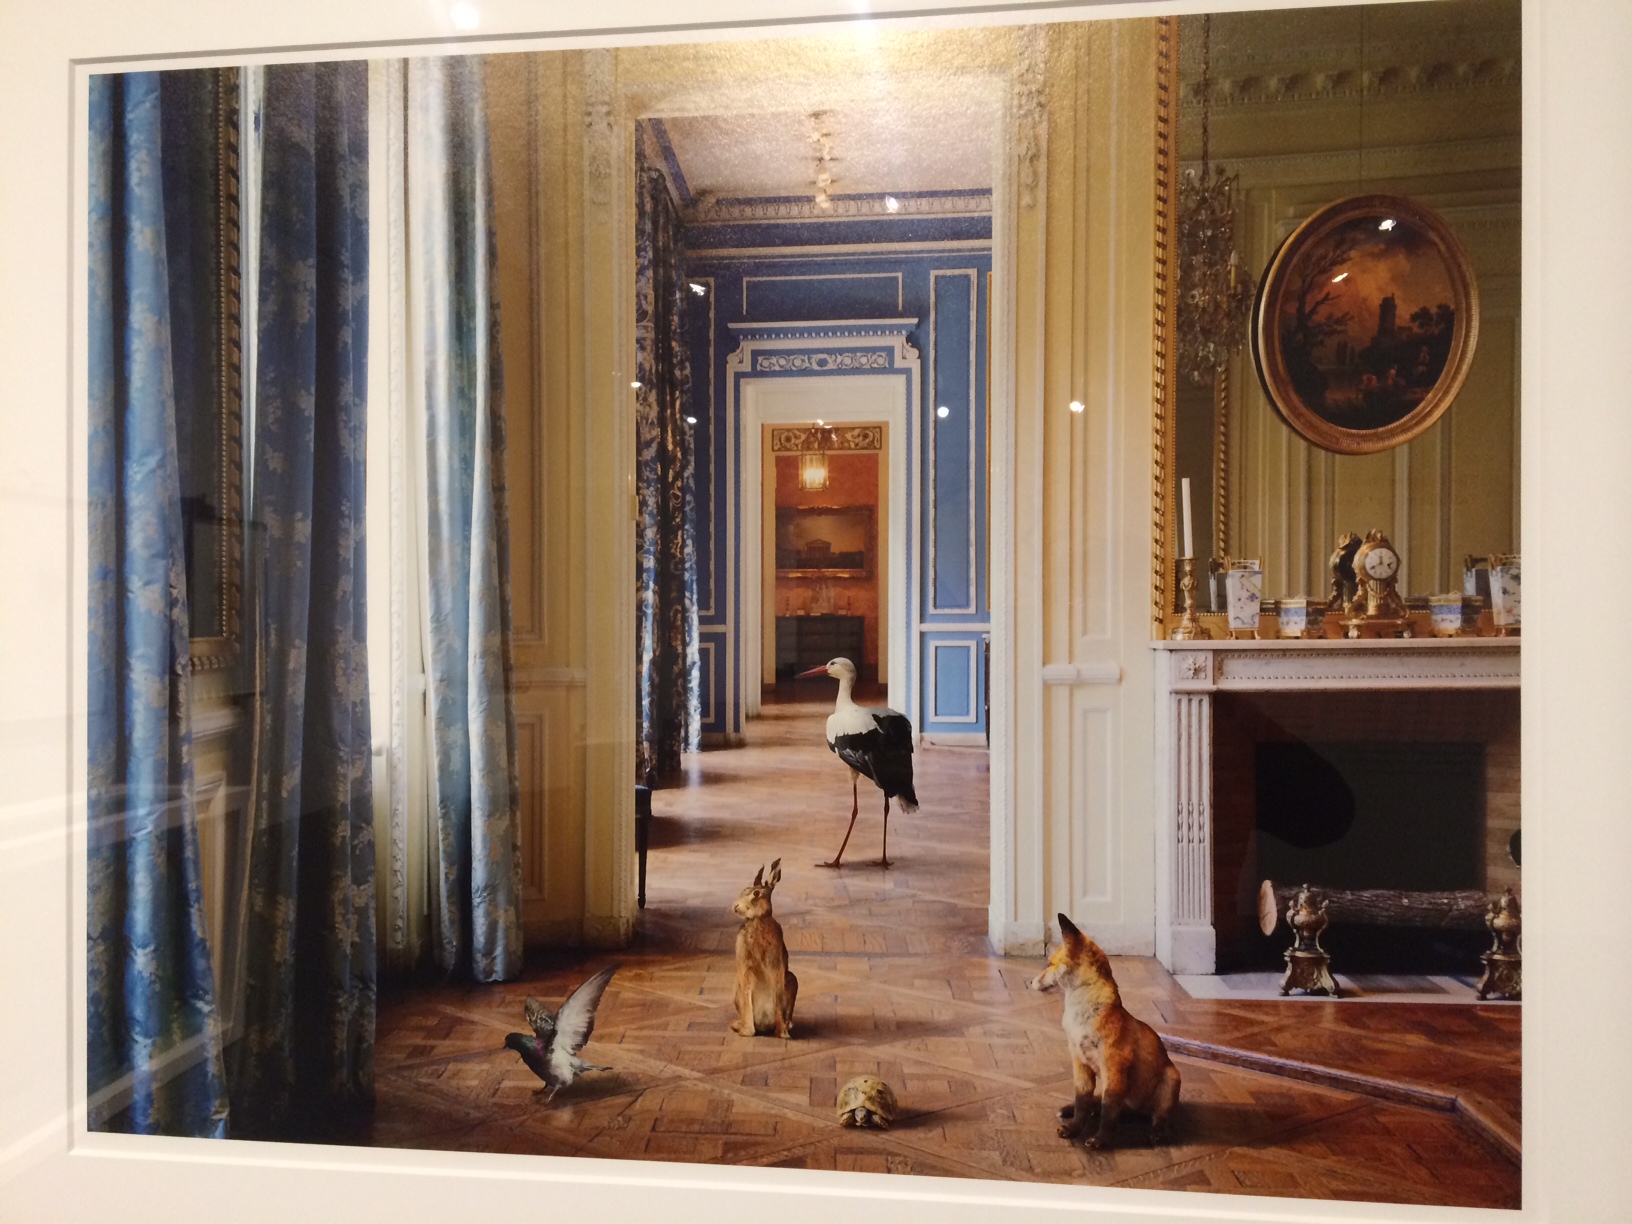 Karen Knorr, "Ledoux's Reception [Carnavalet]" from the Fables series